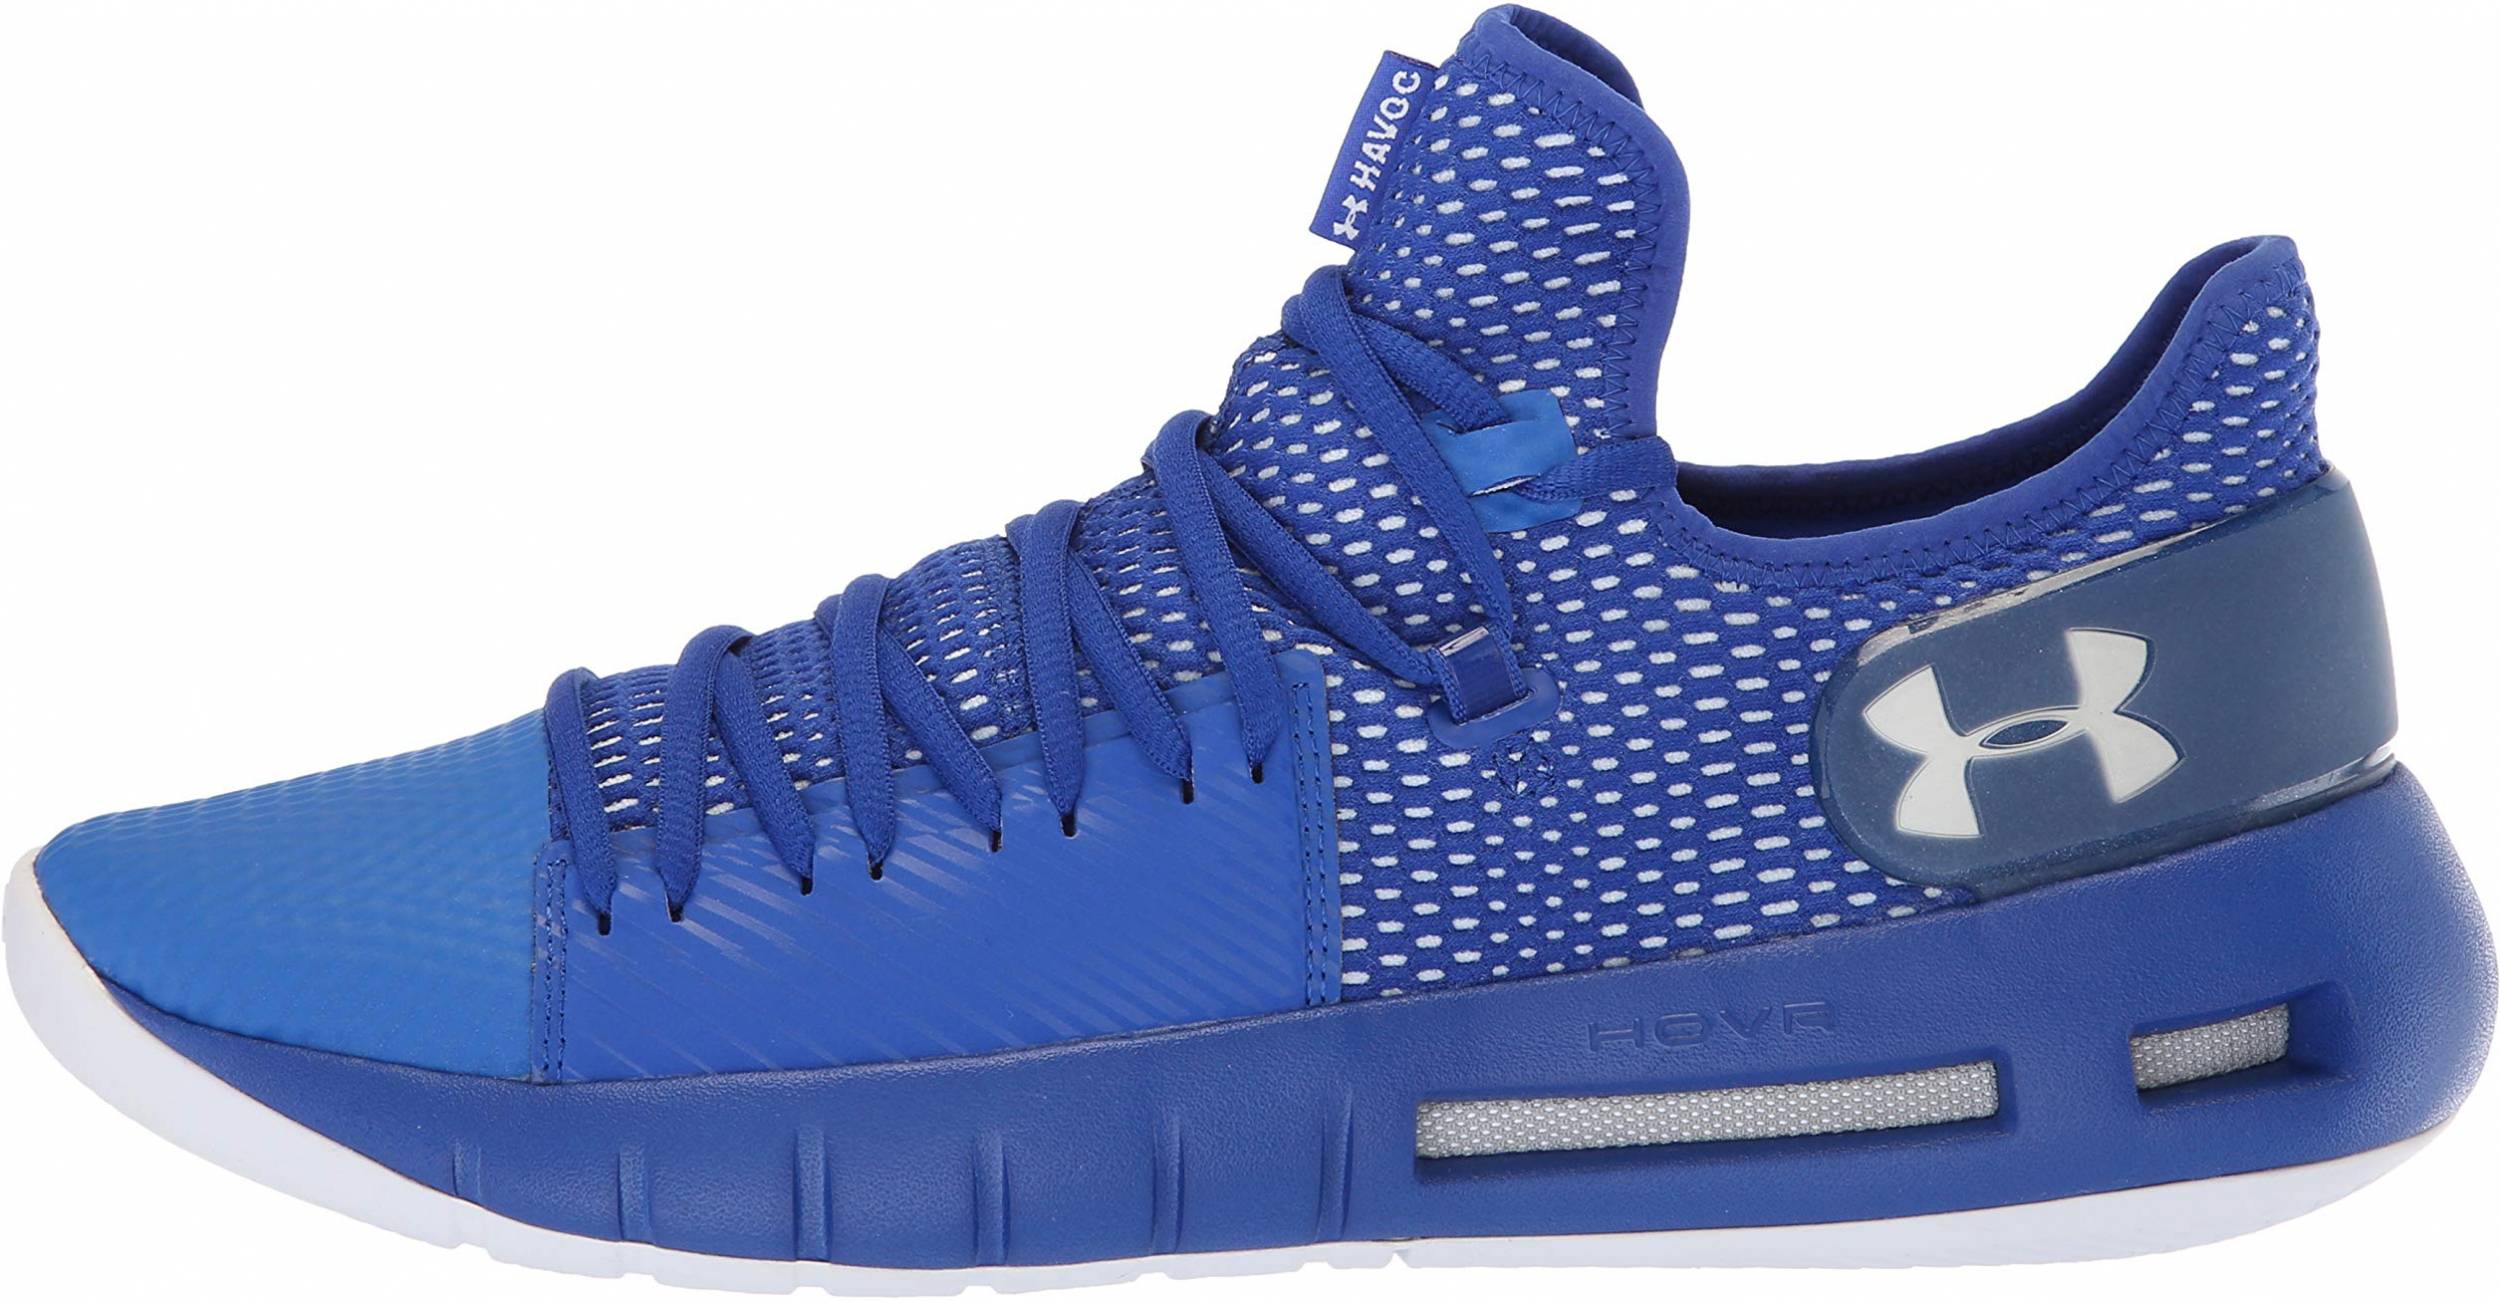 blue and white under armour basketball shoes